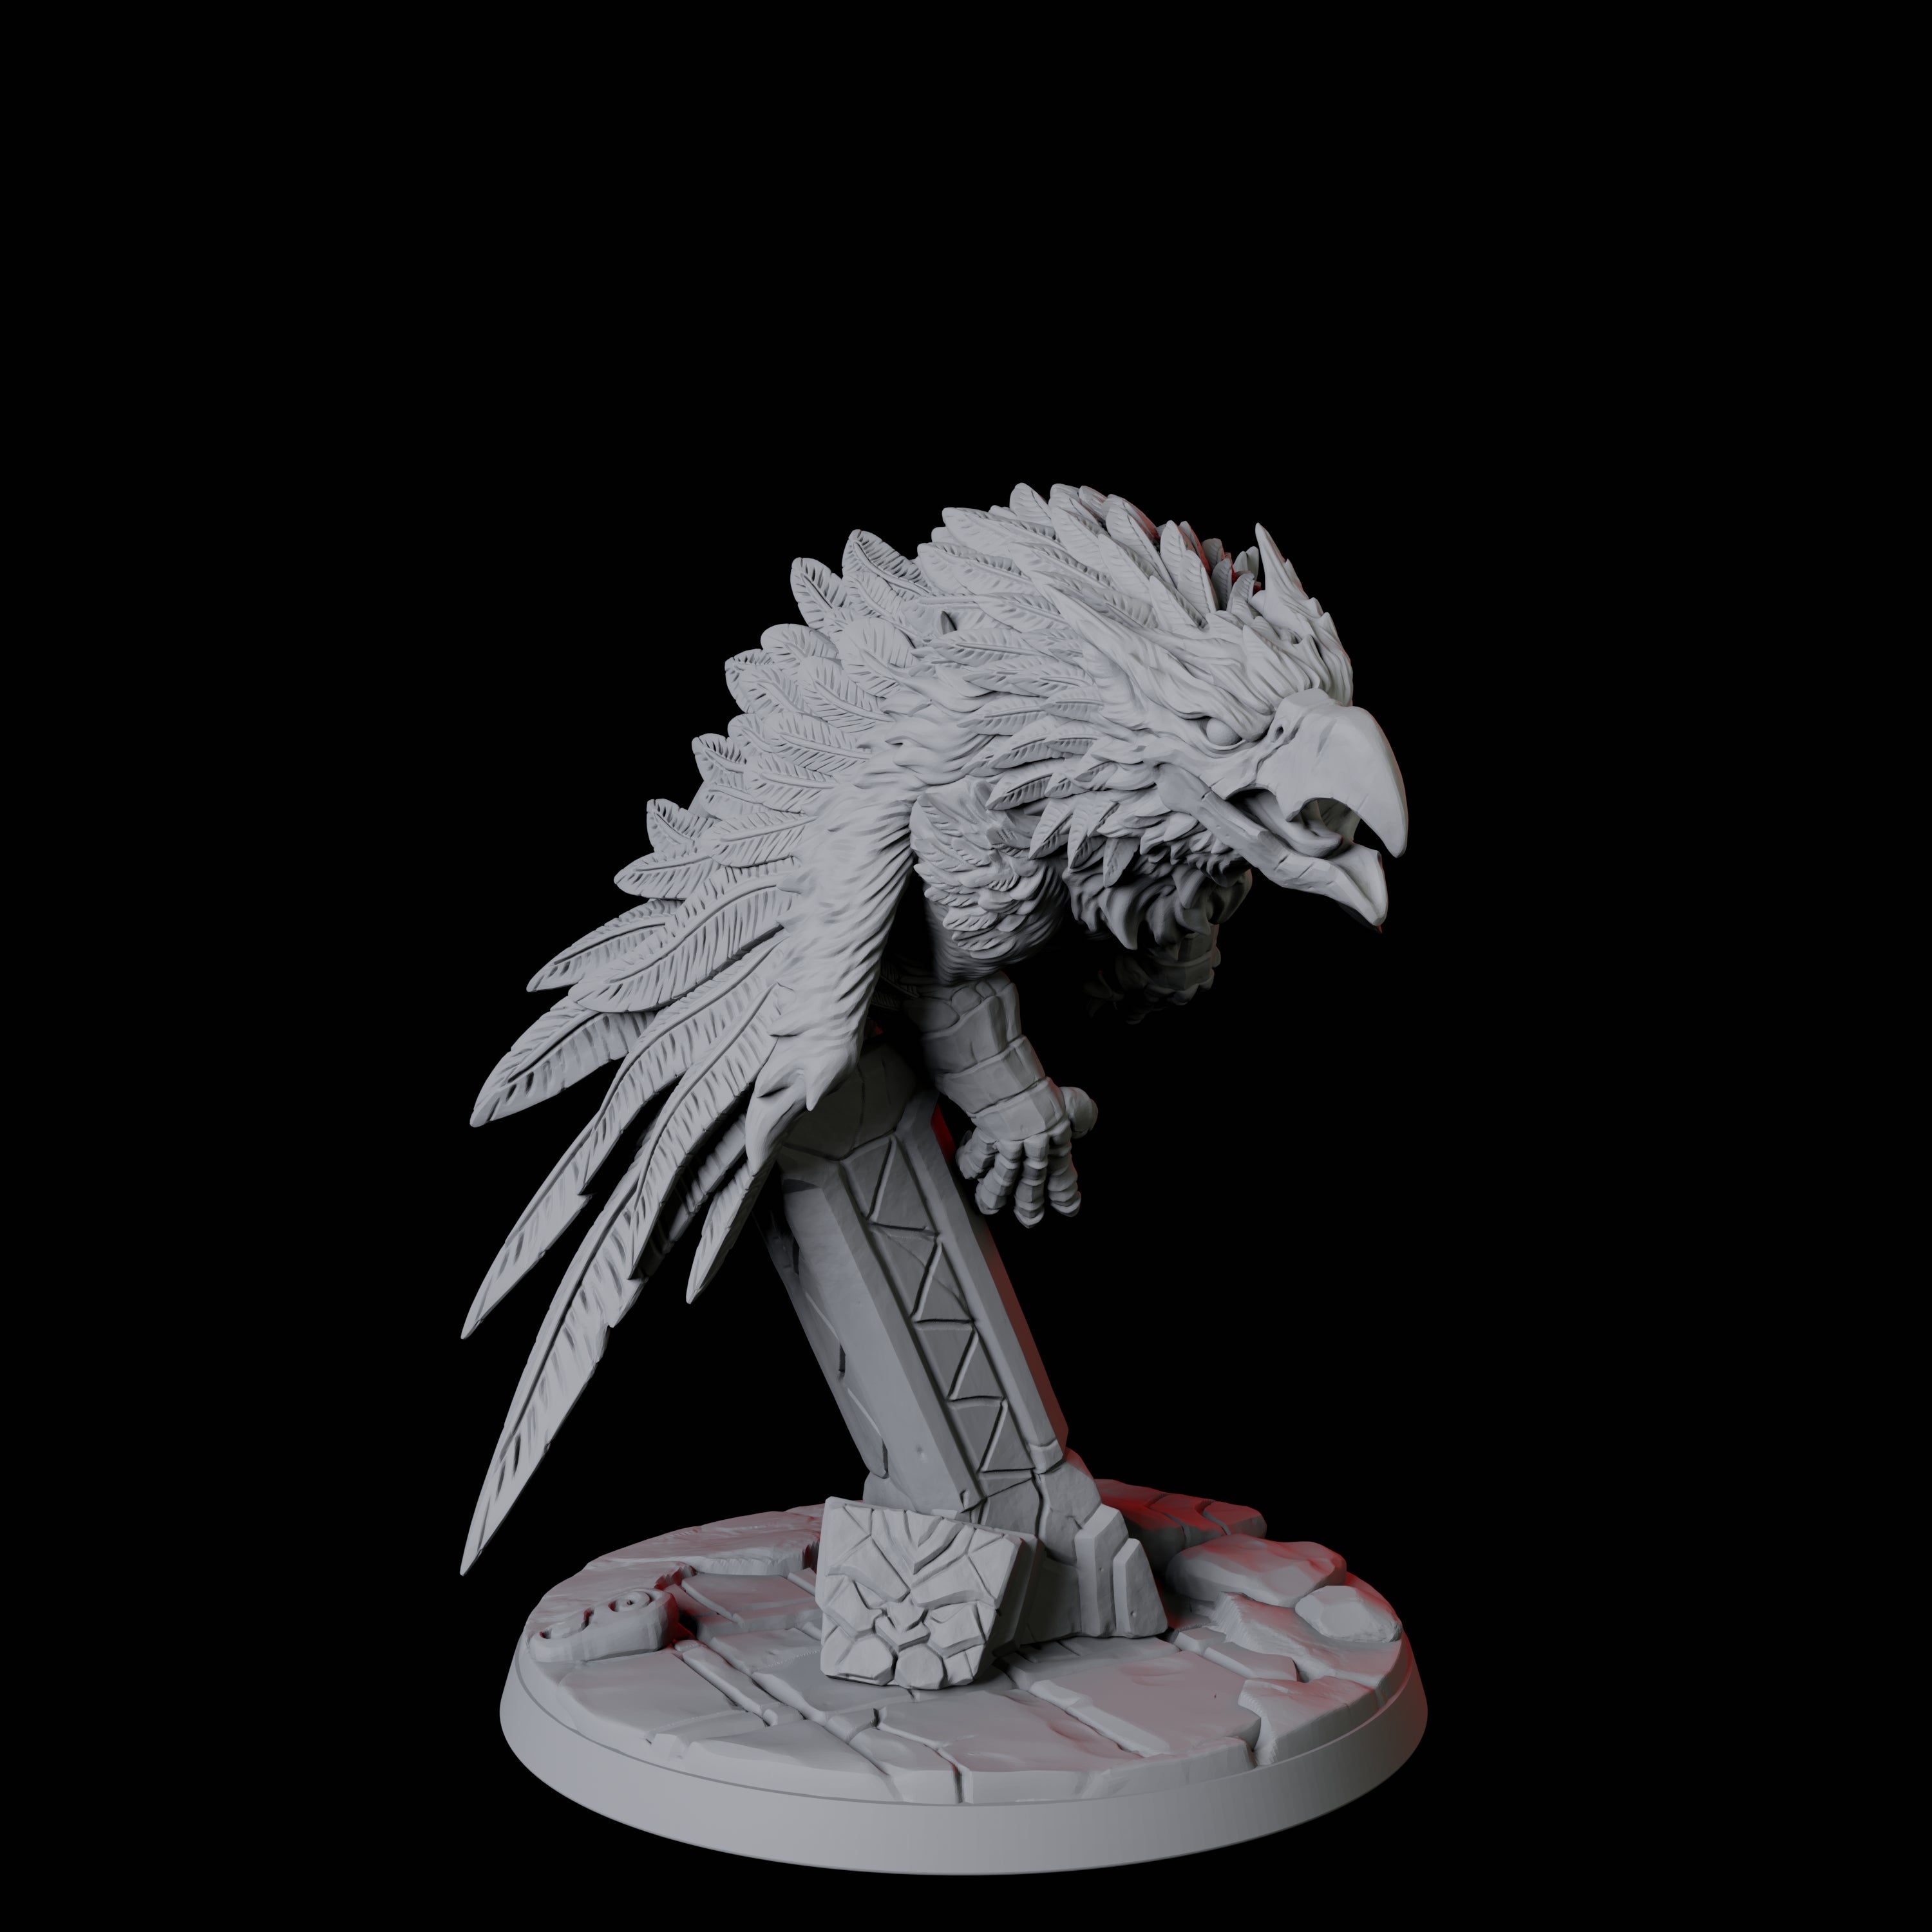 Leaping Griffon B Miniature for Dungeons and Dragons, Pathfinder or other TTRPGs